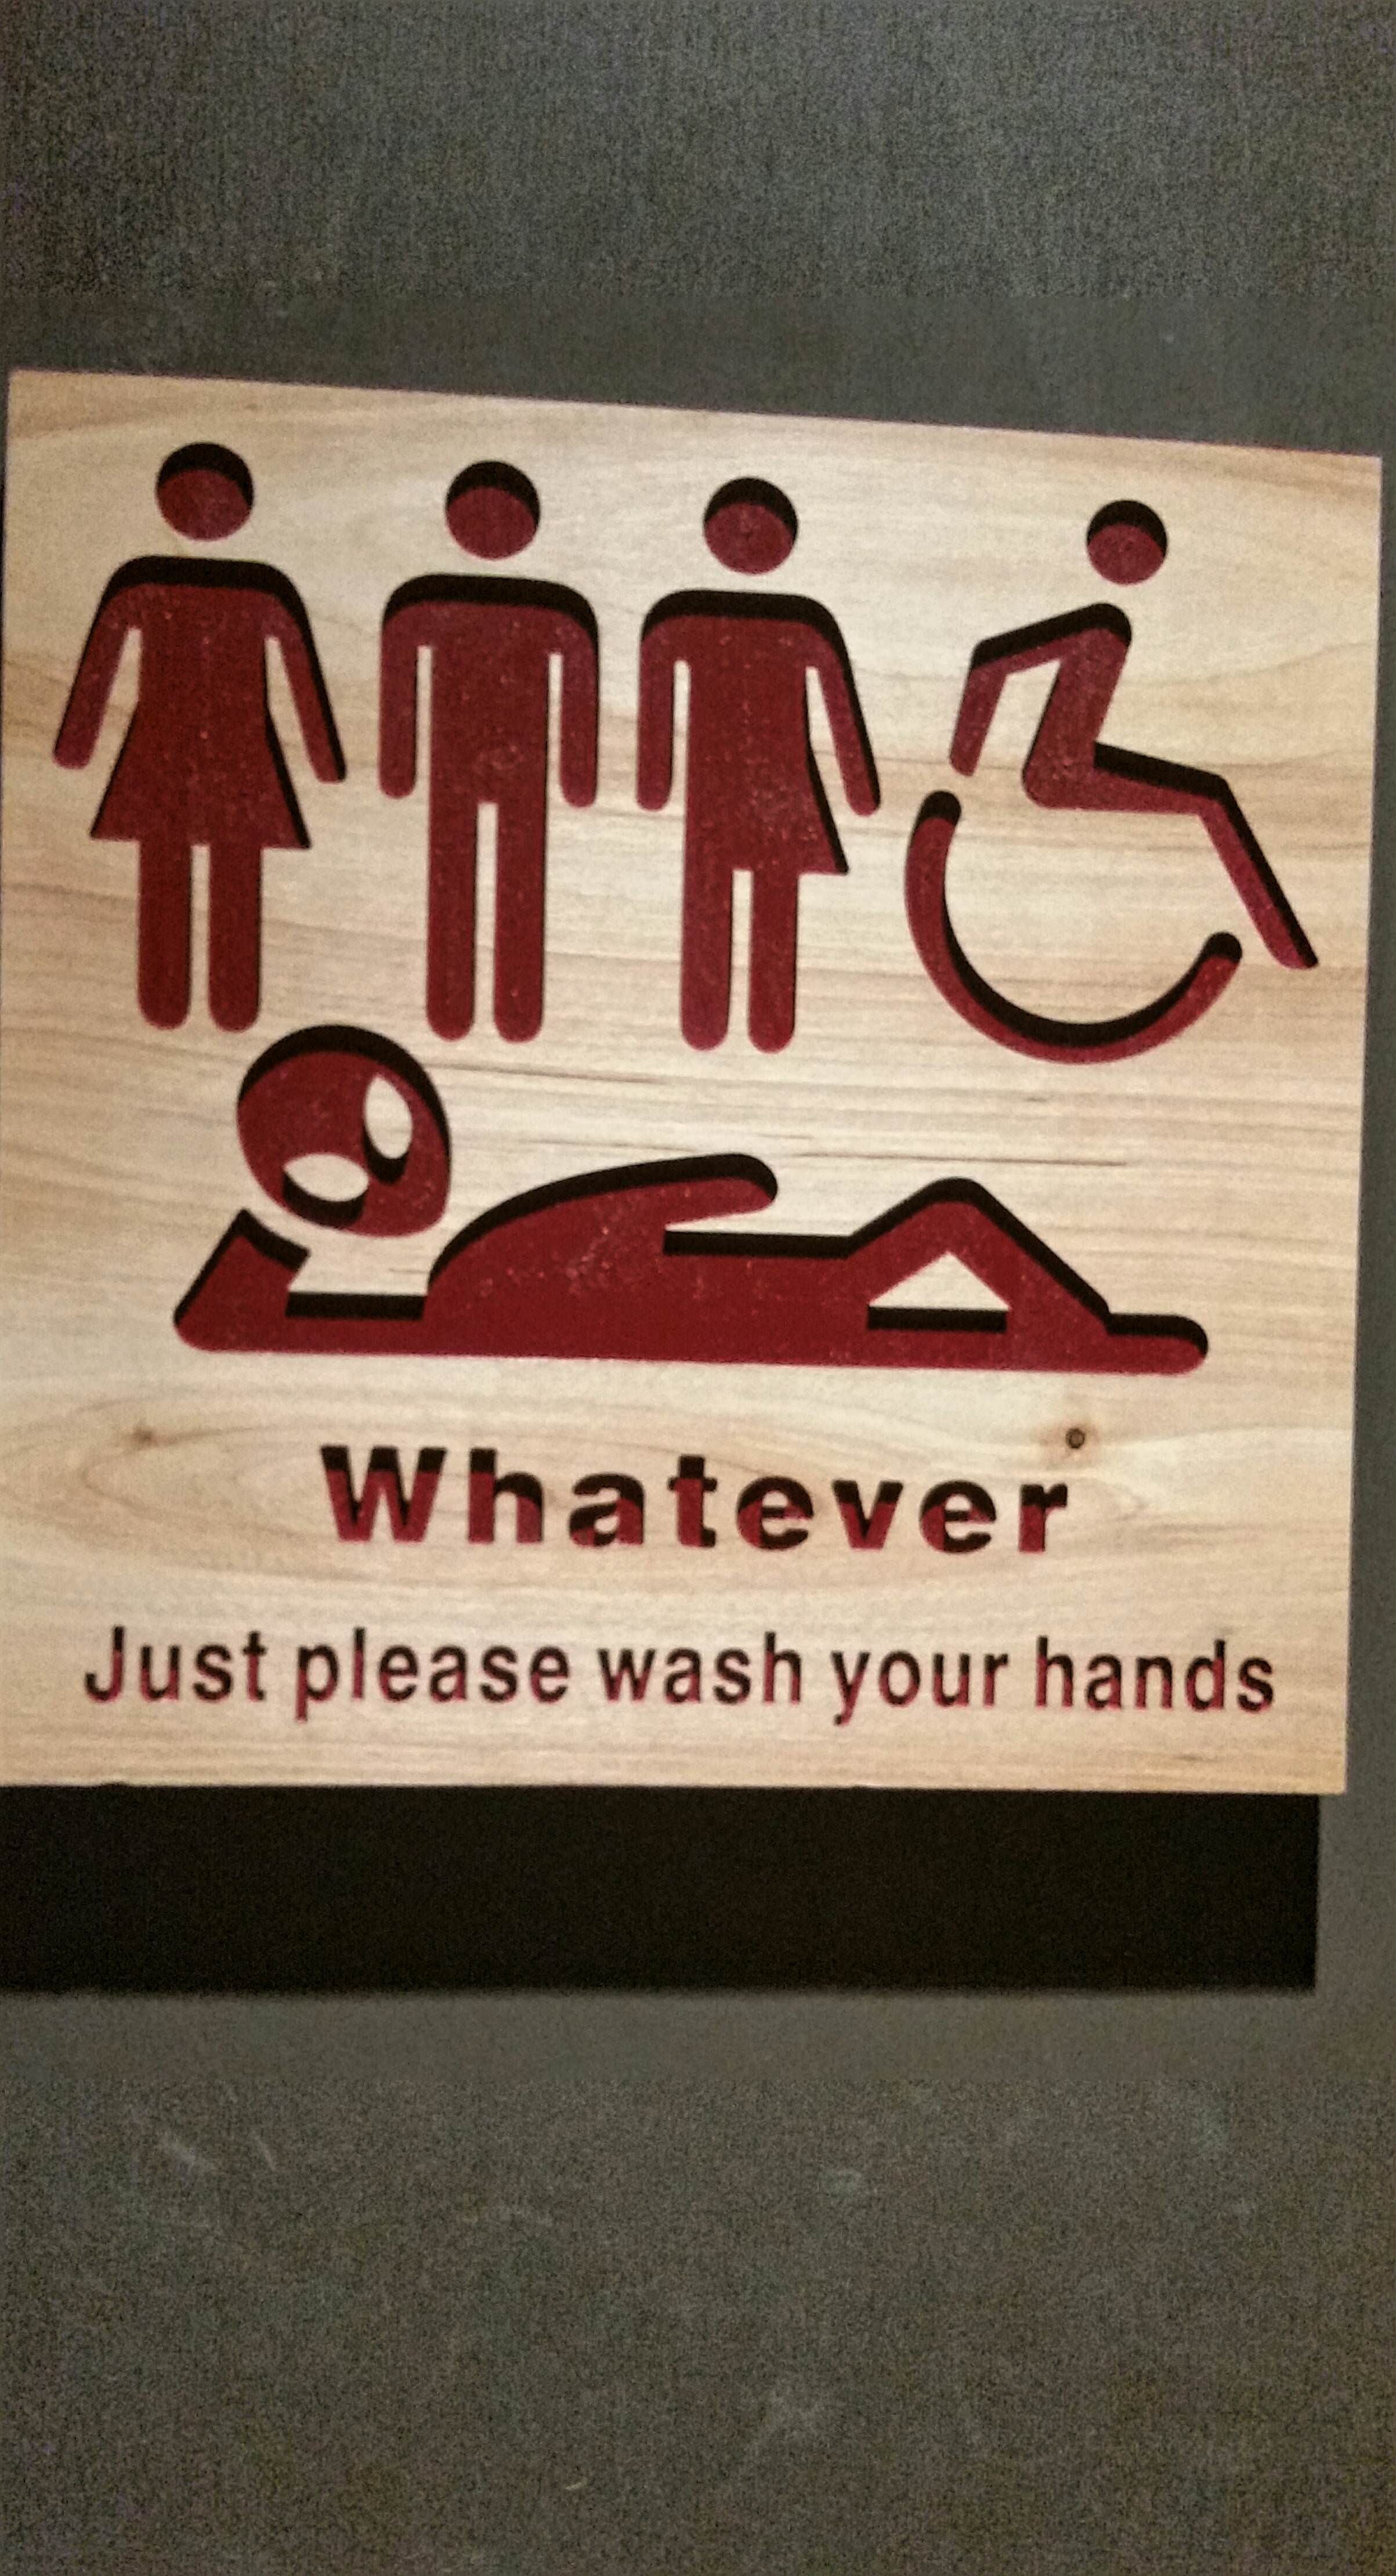 This restroom sign in San Francisco, California